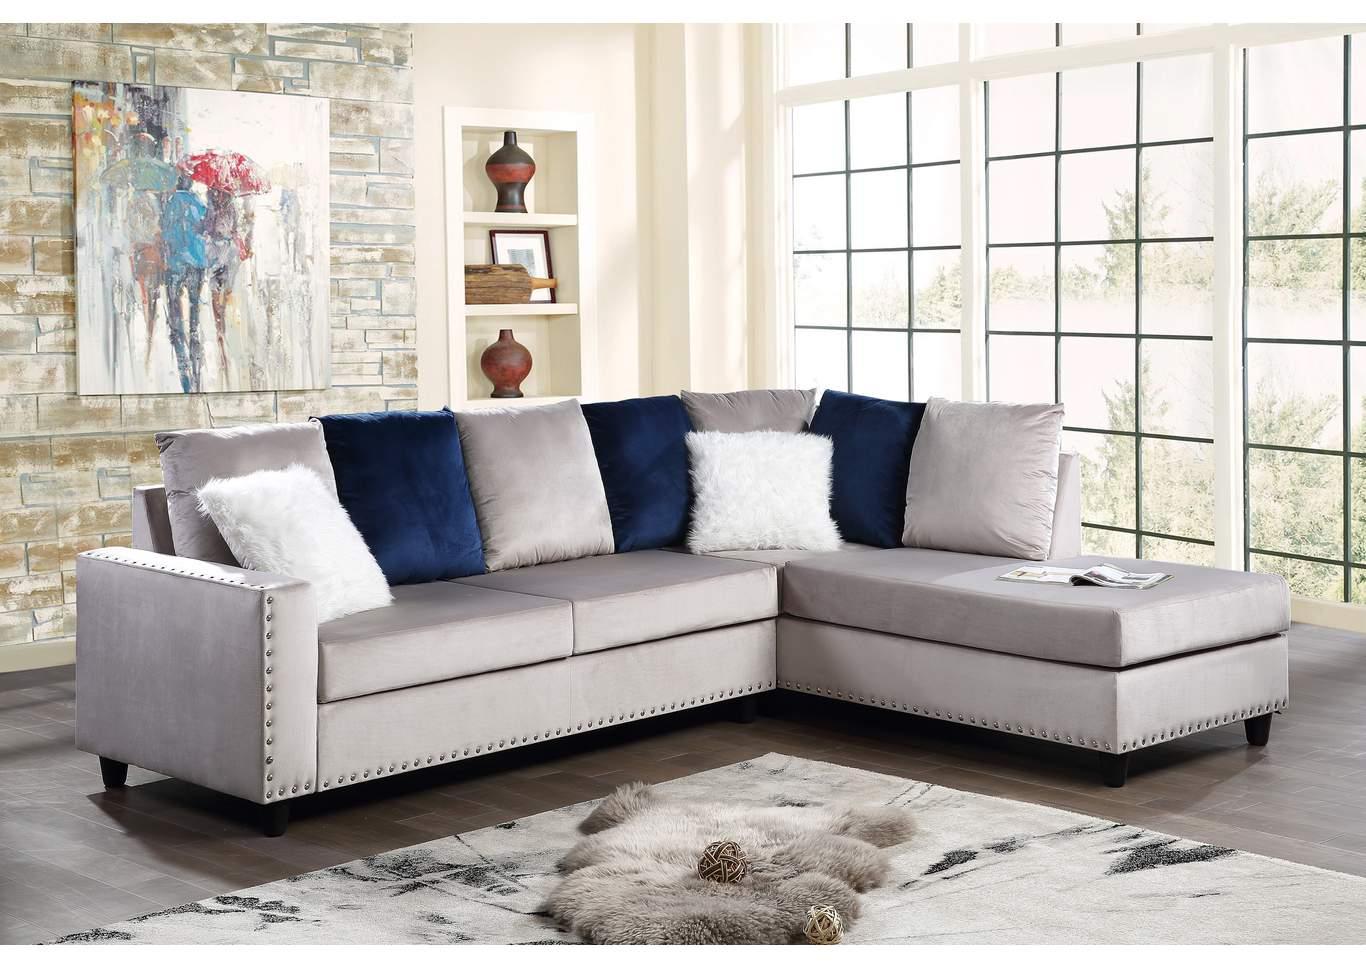 Contemporary, Modern Sectional Sofa MARTHA GHF-808857622297 in Gray Fabric